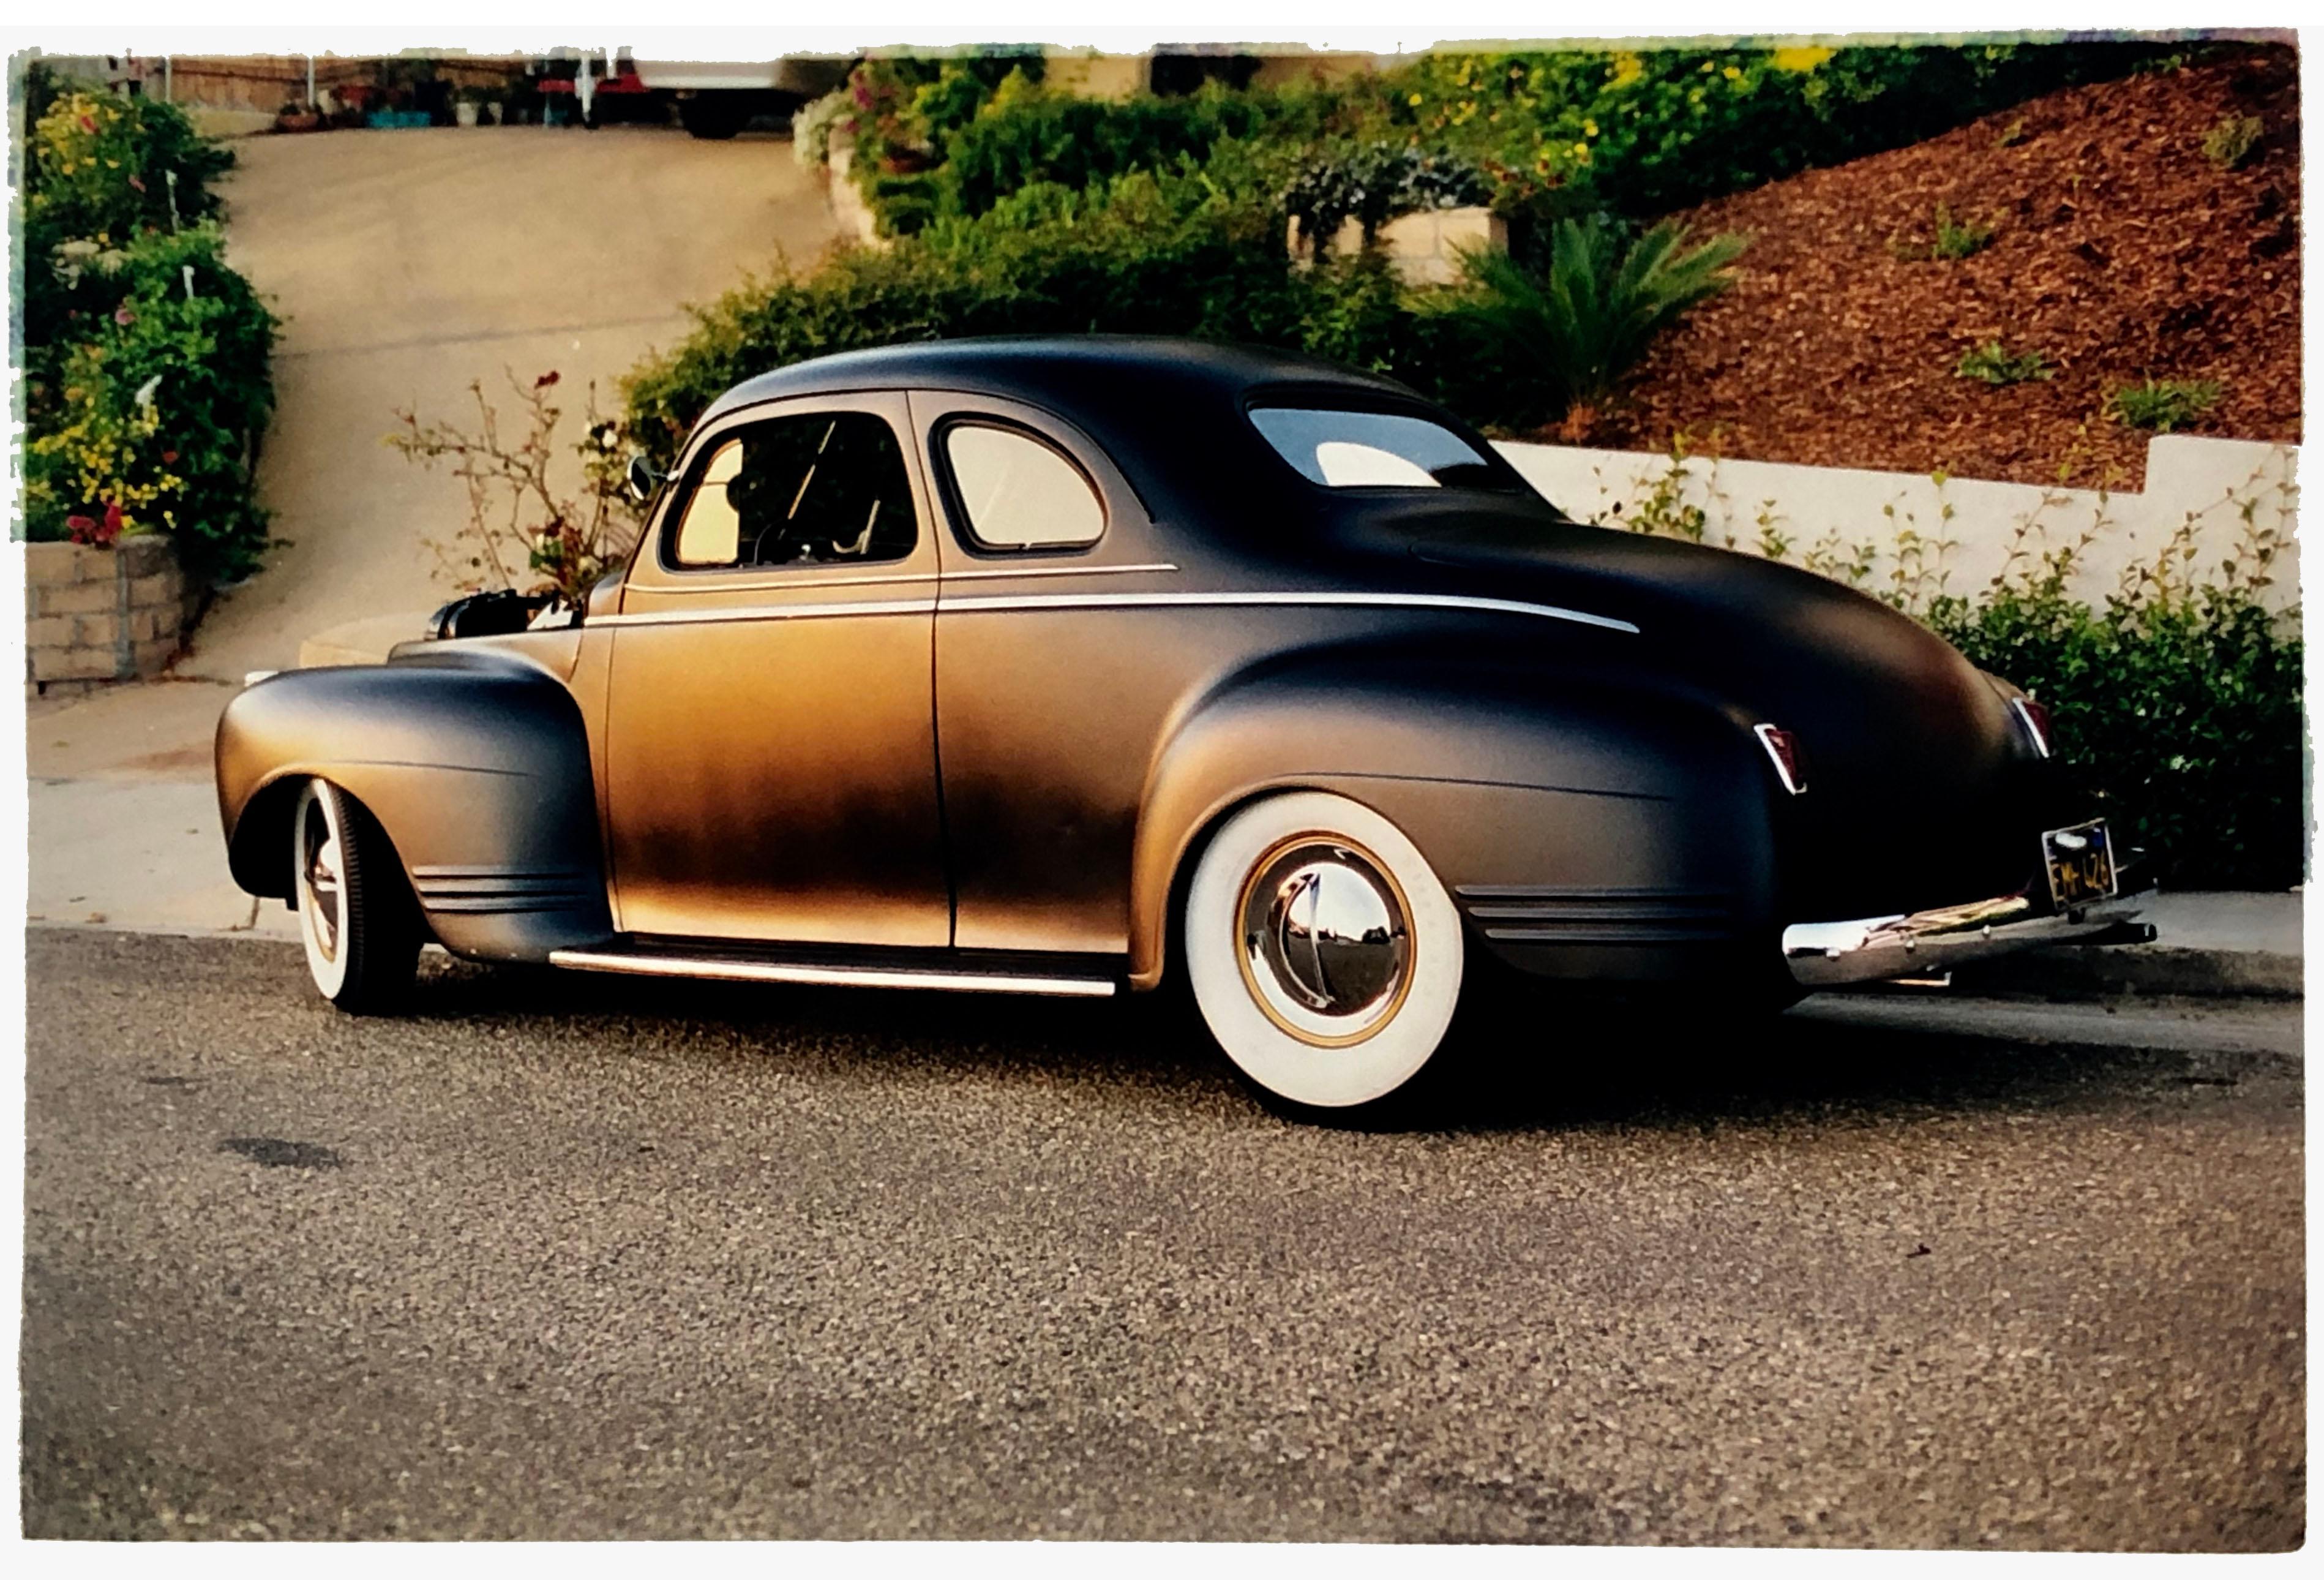 Richard Heeps Print - Shelly's '41 Plymouth, California - Dream in Color Series - Vintage Car Photo